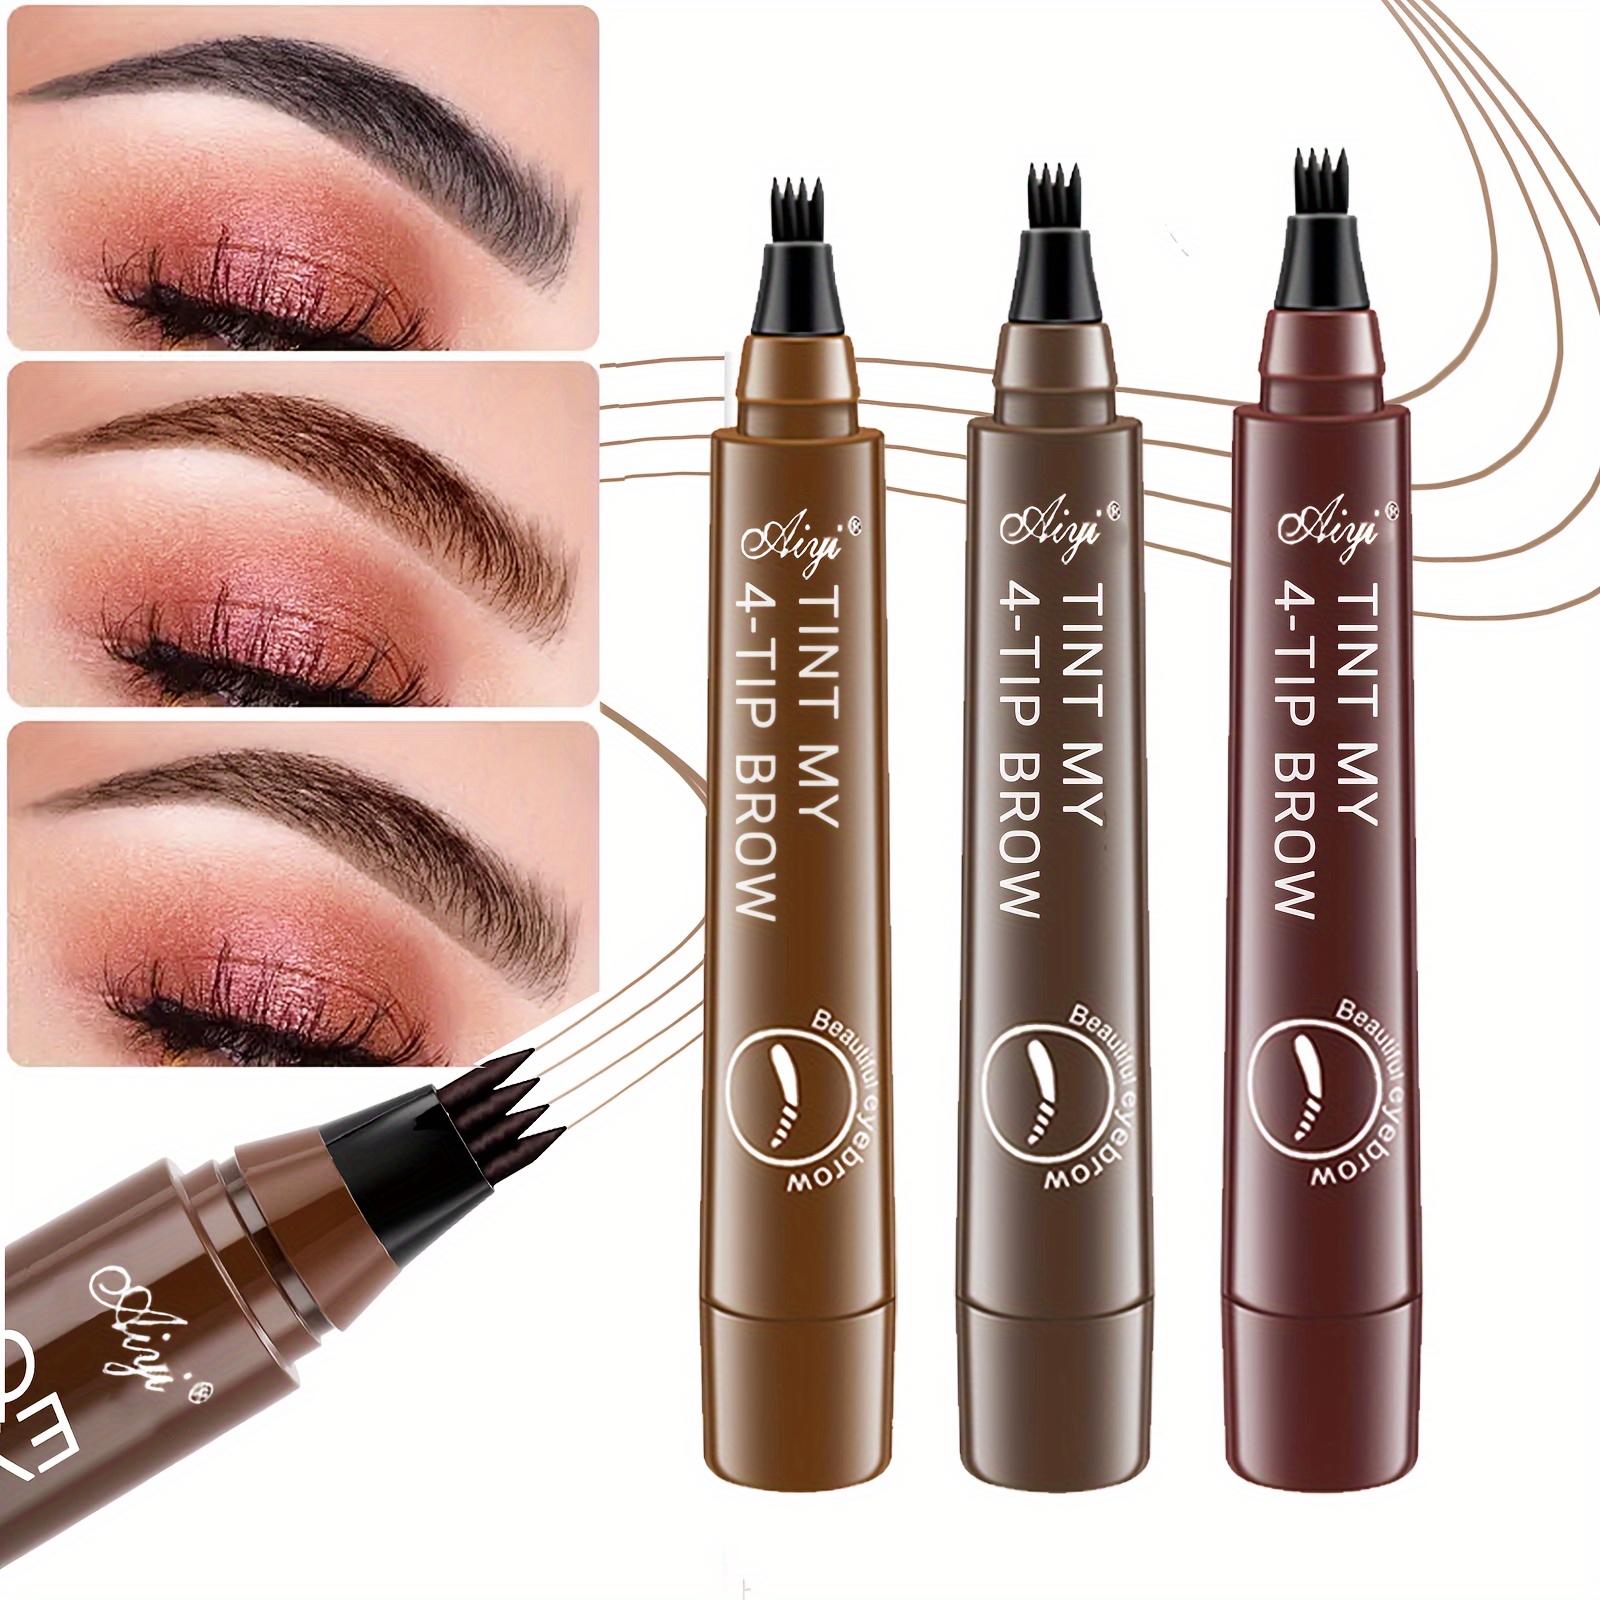 

4pcs Liquid Eyebrow Tint Pen, Waterproof & Long Lasting Split Micro Tip Brow Pen, Available In A Variety Of Natural Colors, Makeup & Cosmetic Tools